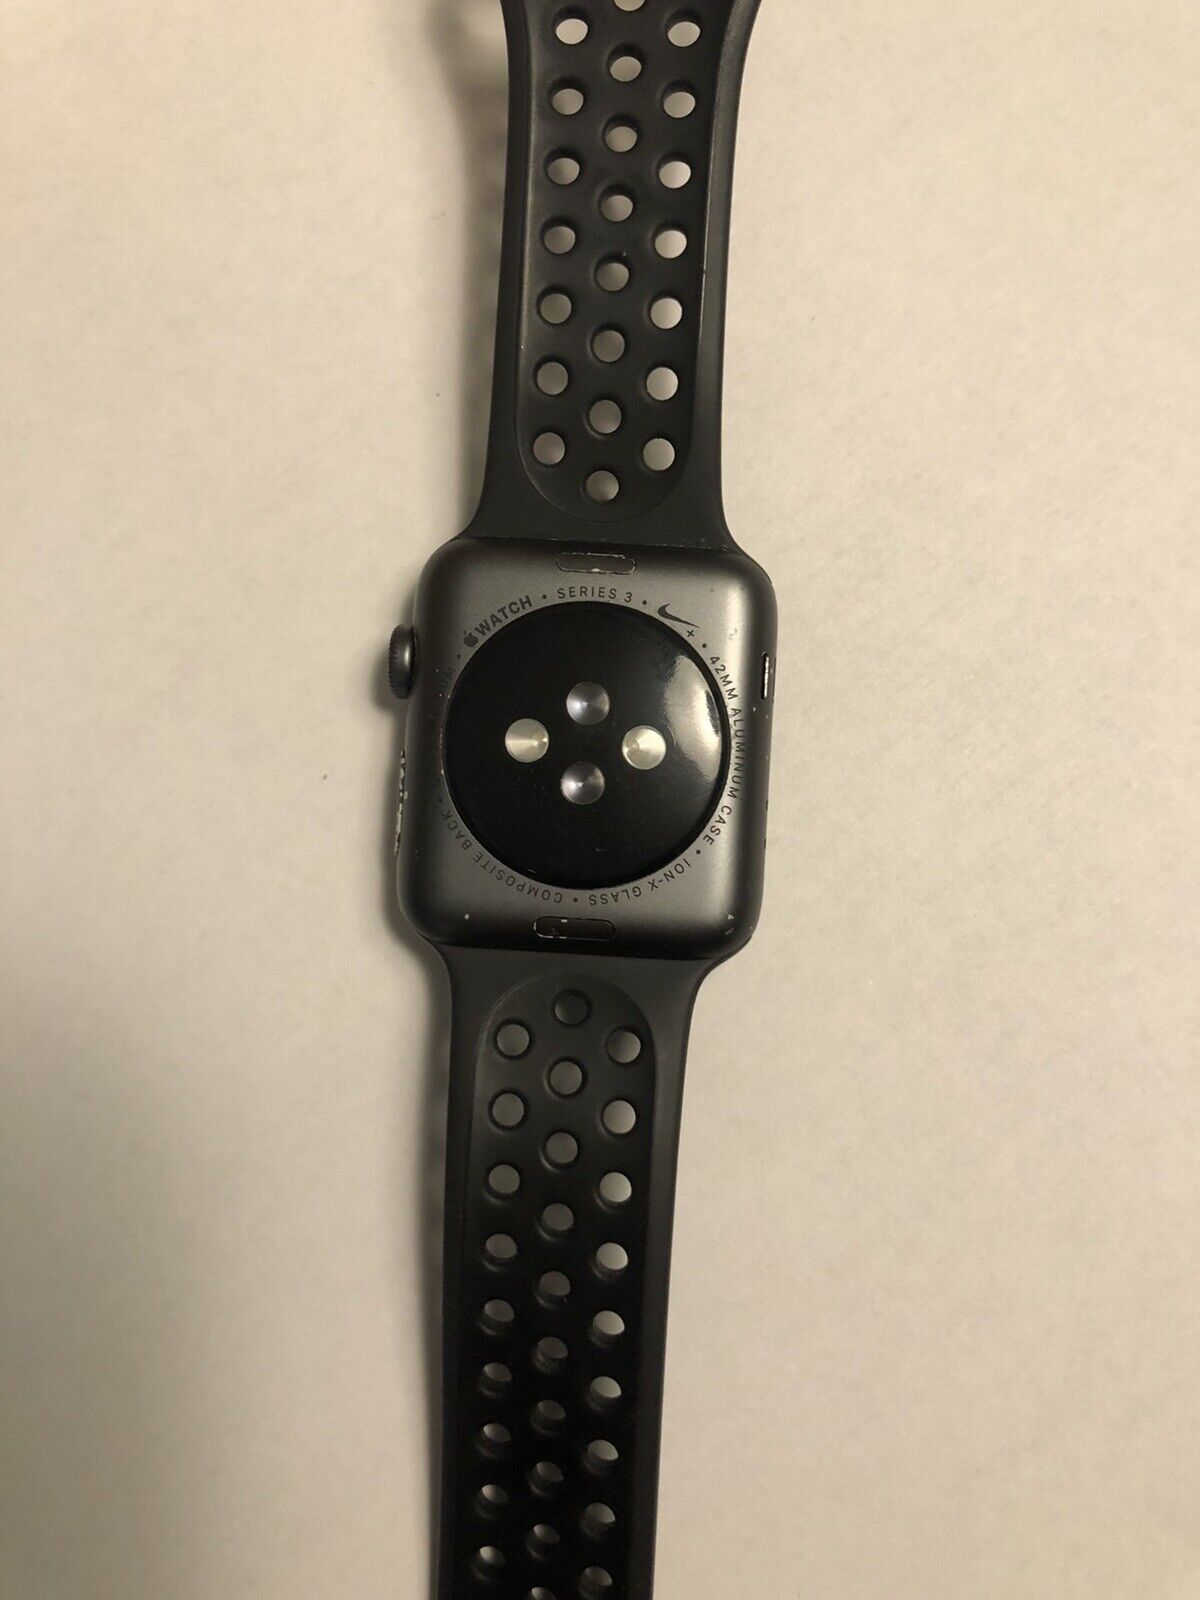 Apple+Watch+Nike%2B+42mm+Space+Gray+Aluminium+Case+with+Anthracite